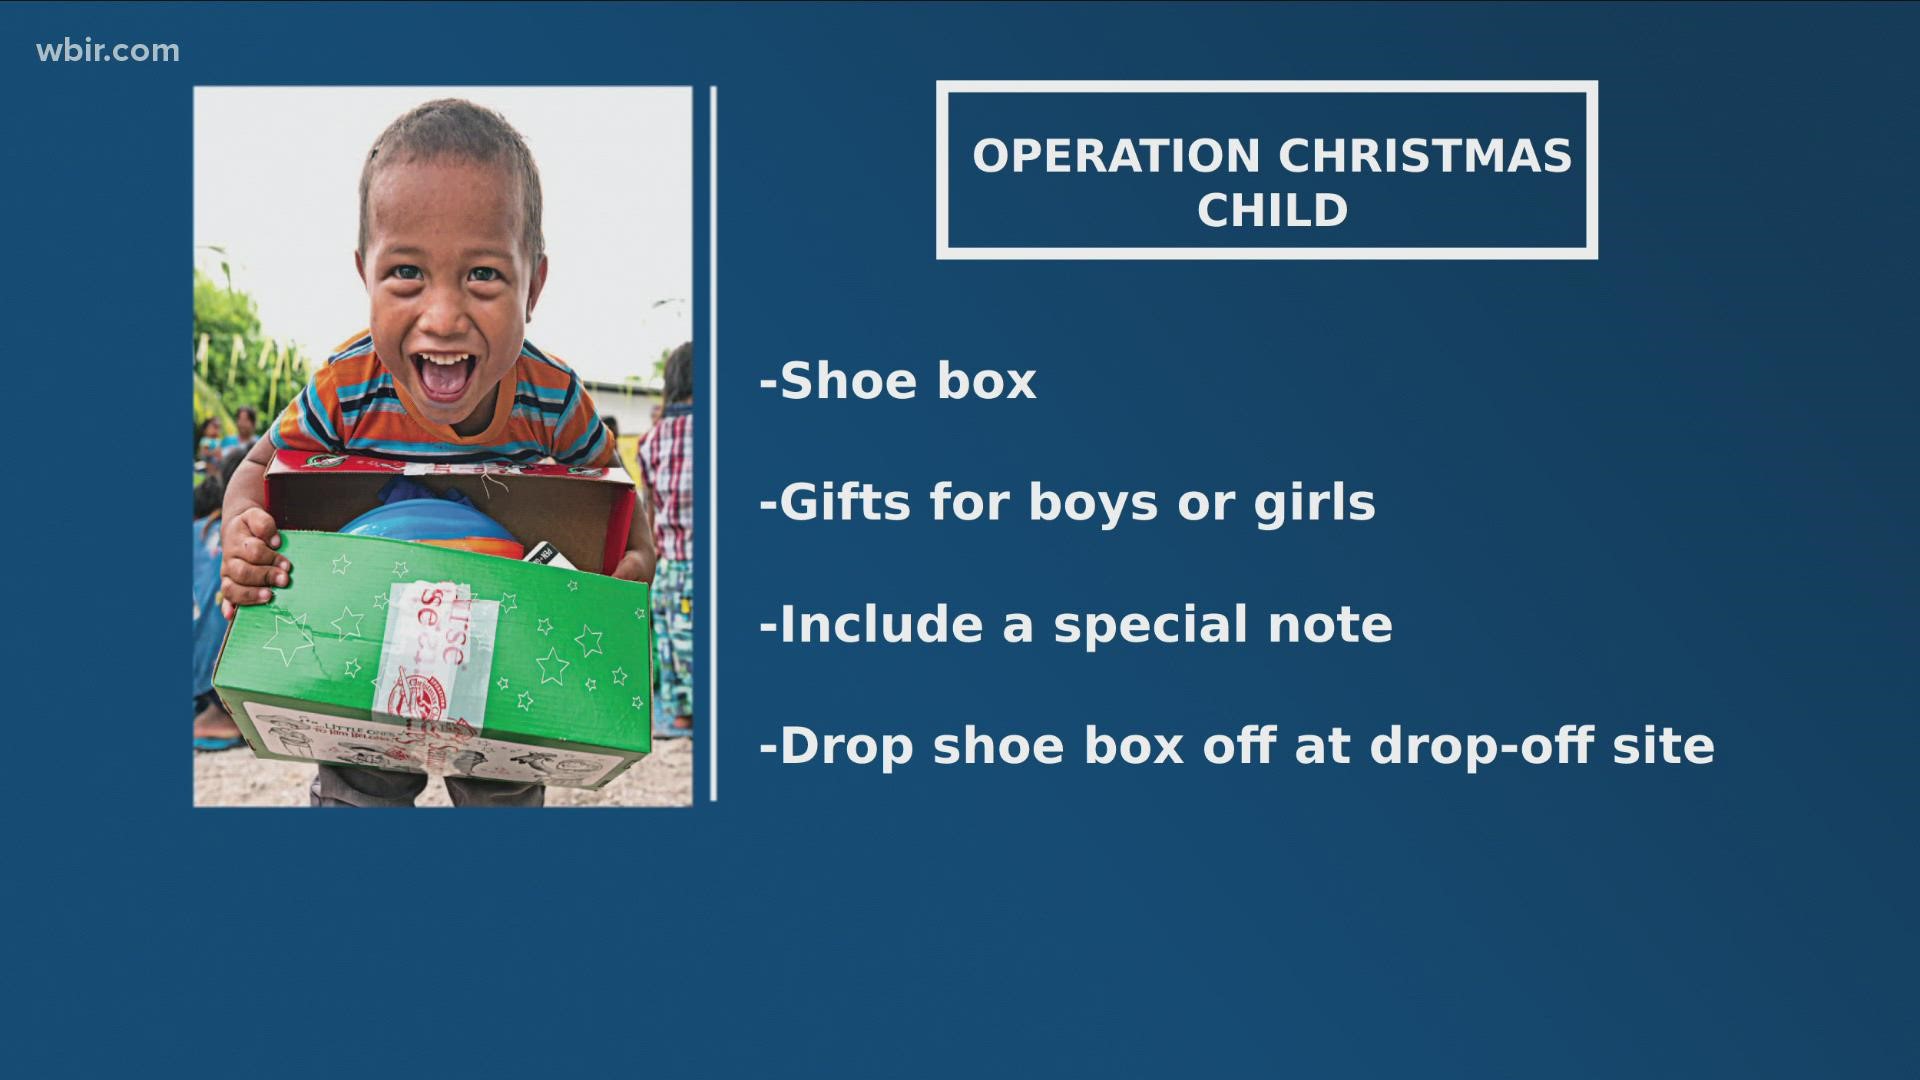 Operation Christmas Child is a nationwide effort to provide kids all over the world with a Christmas gift.